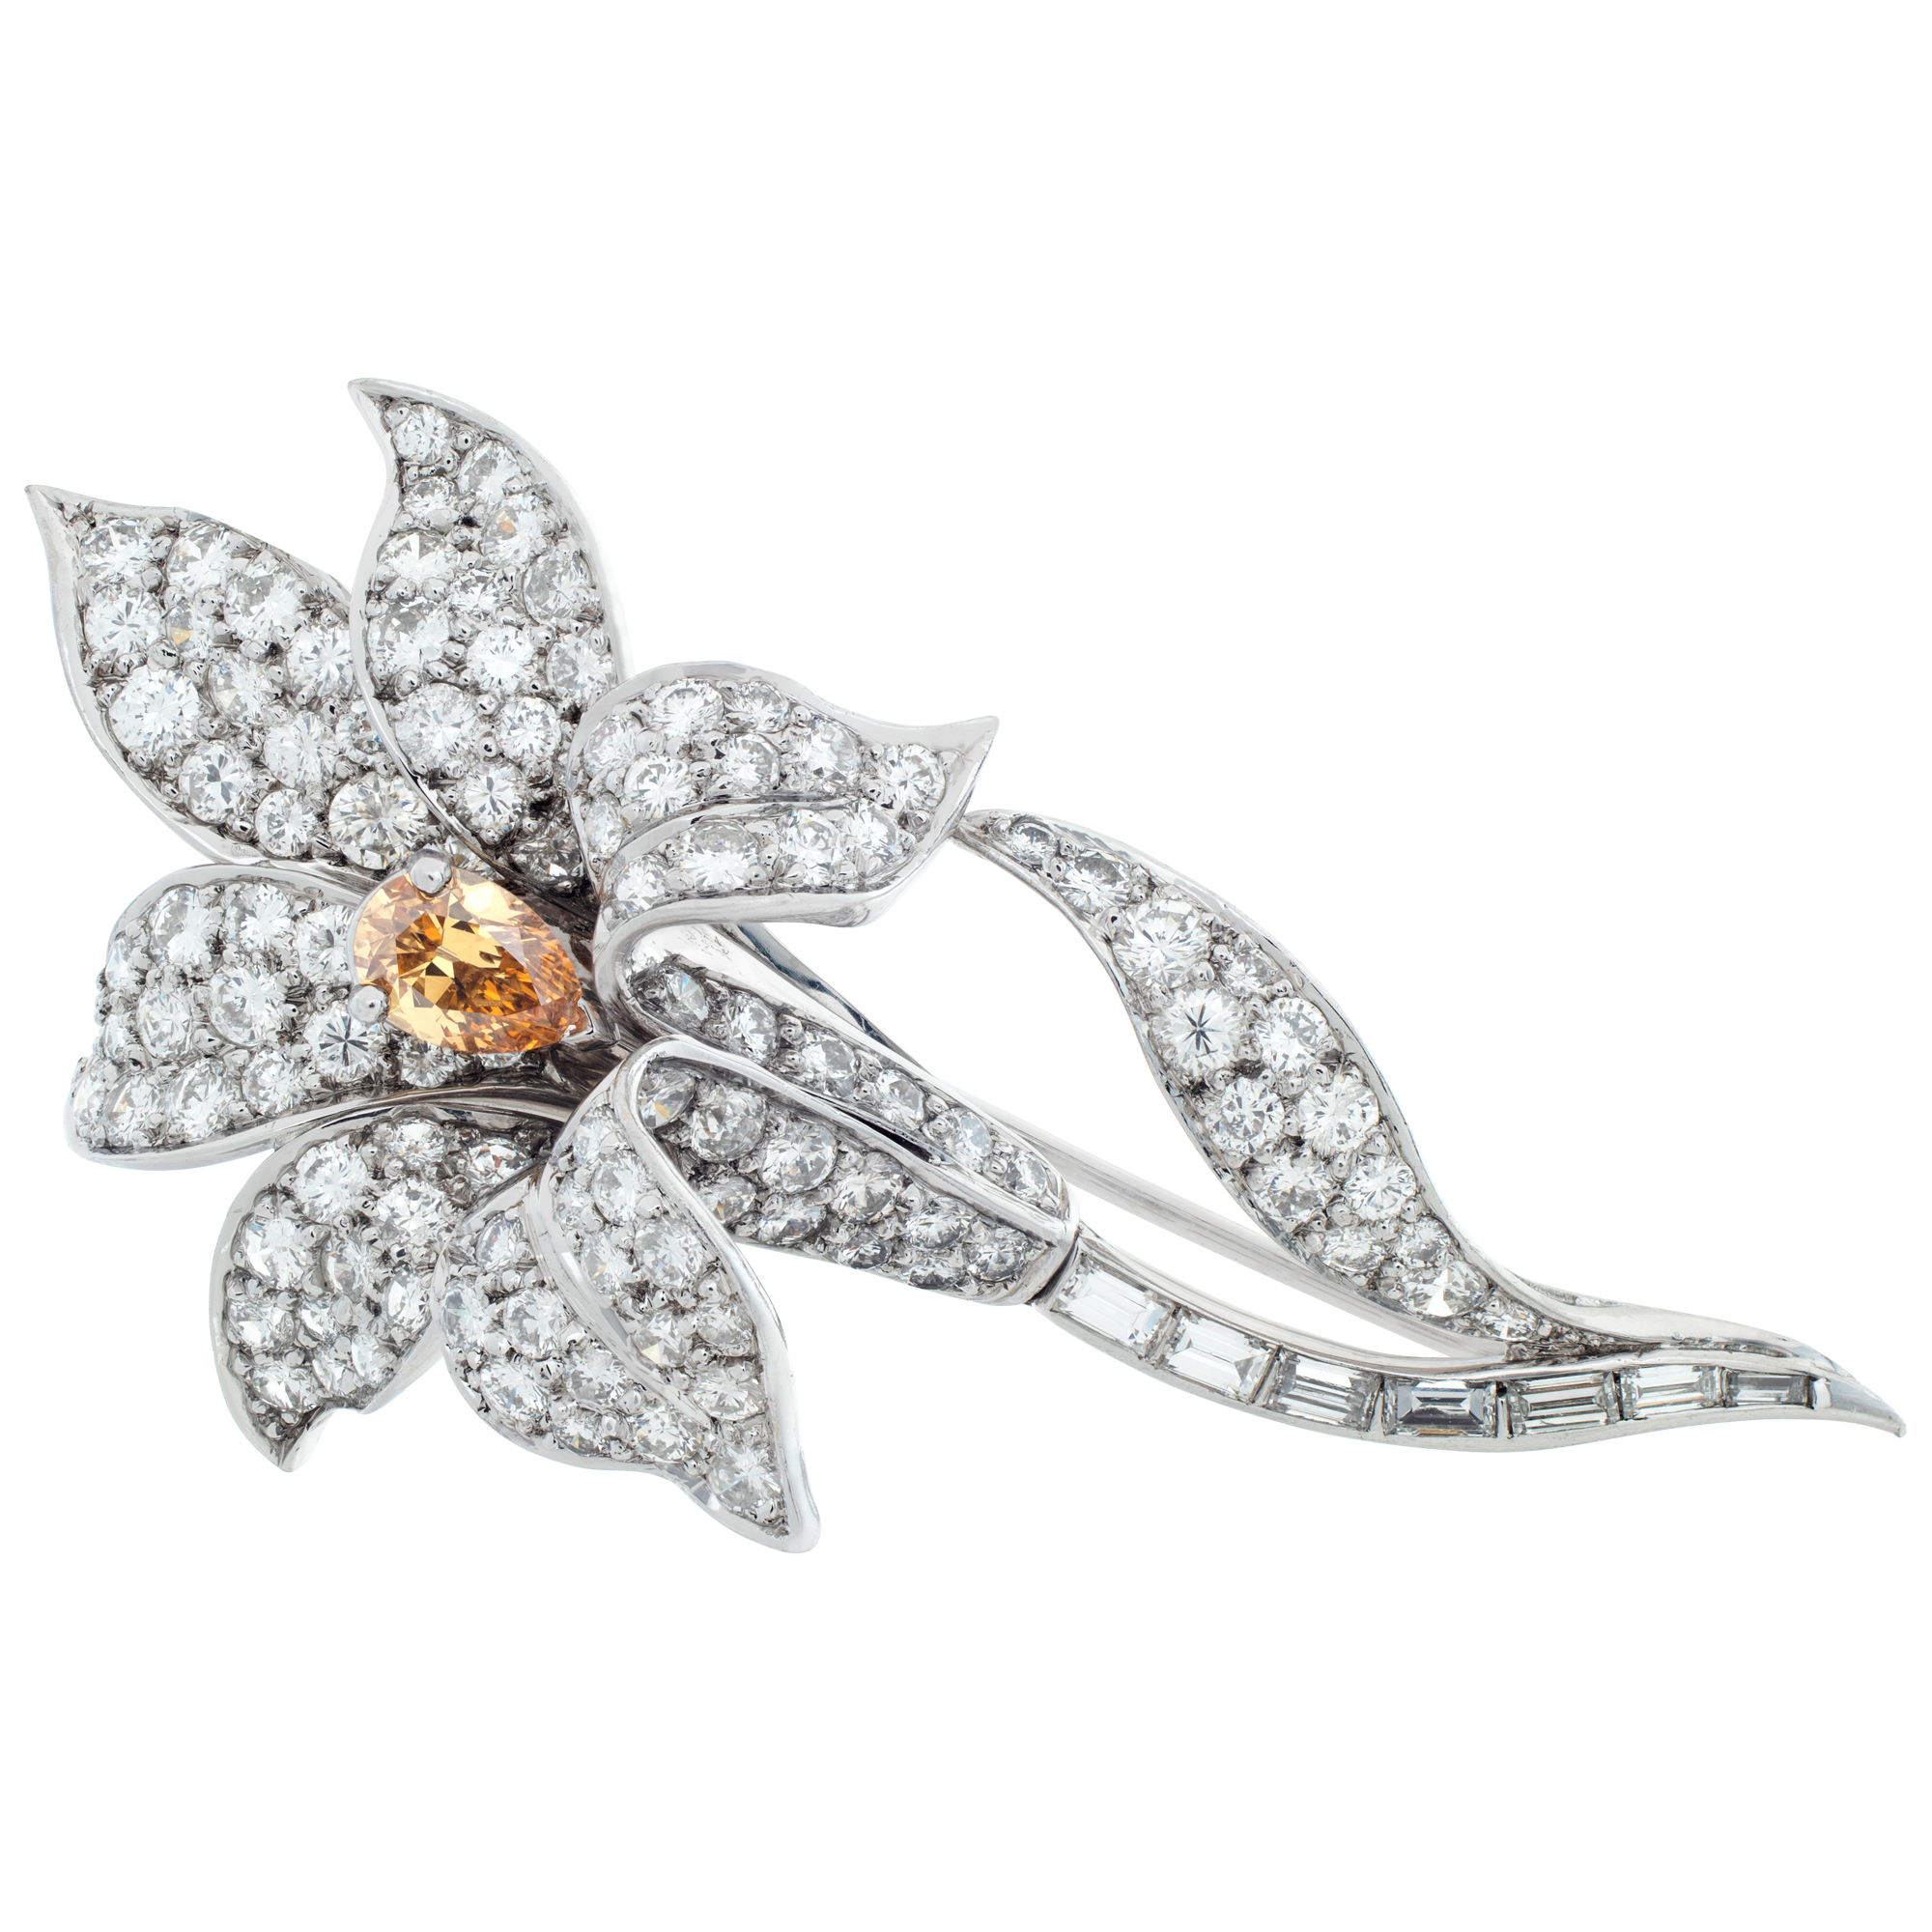 Flower brooch with round brilliant and baguette diamonds set in 18K white gold. image 1